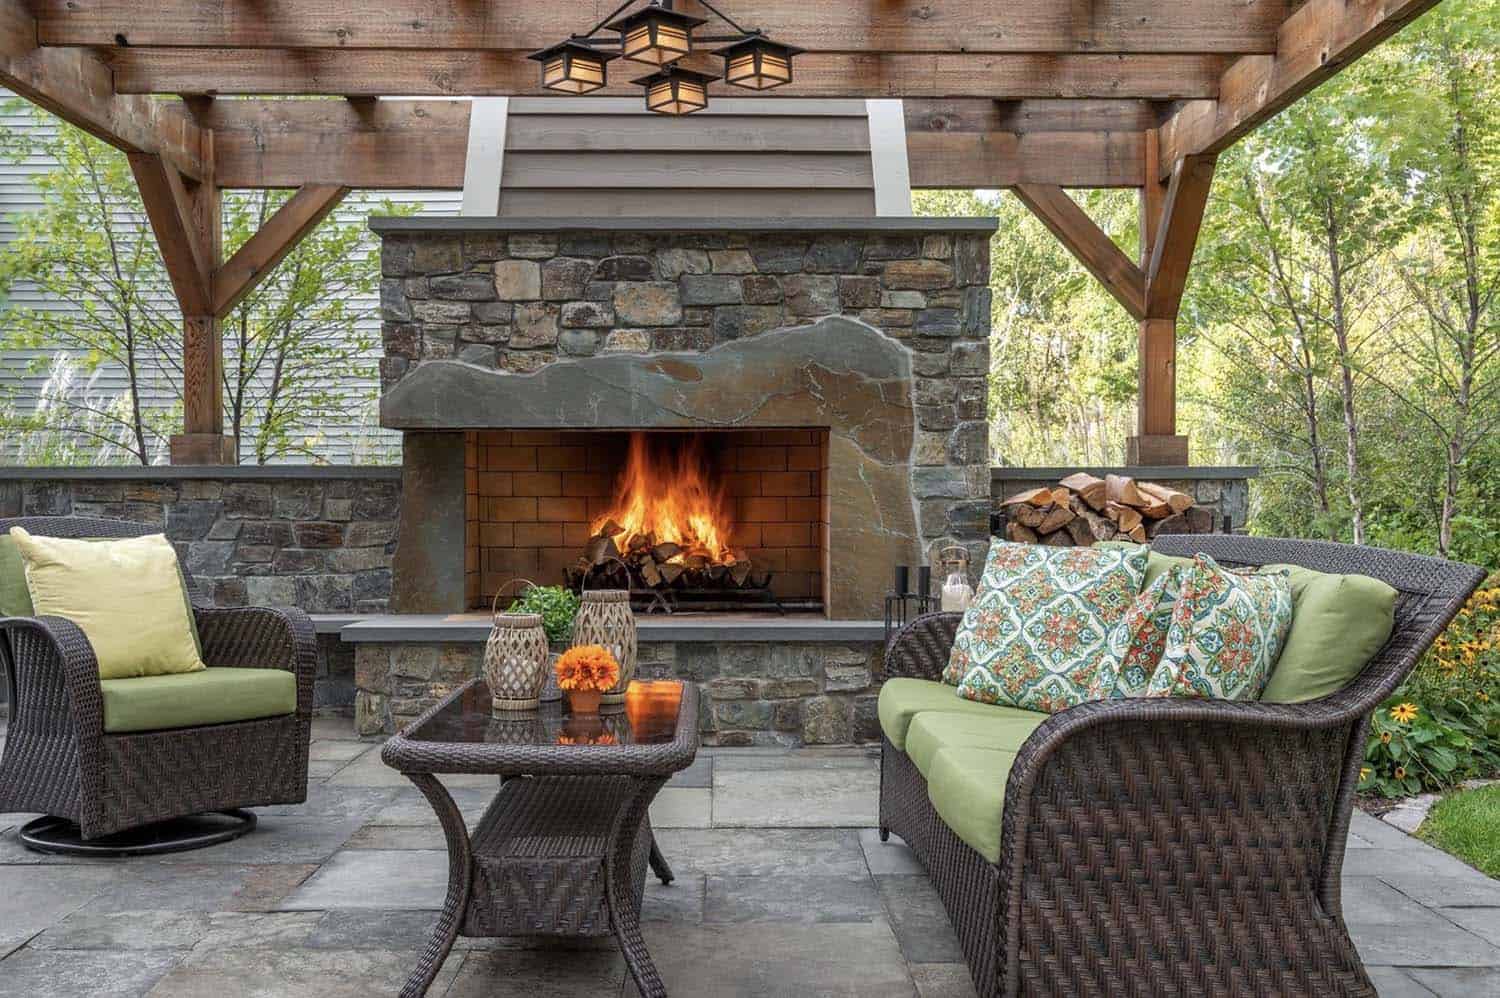 statement-fireplace-with-montana-stone-and-a-pergola